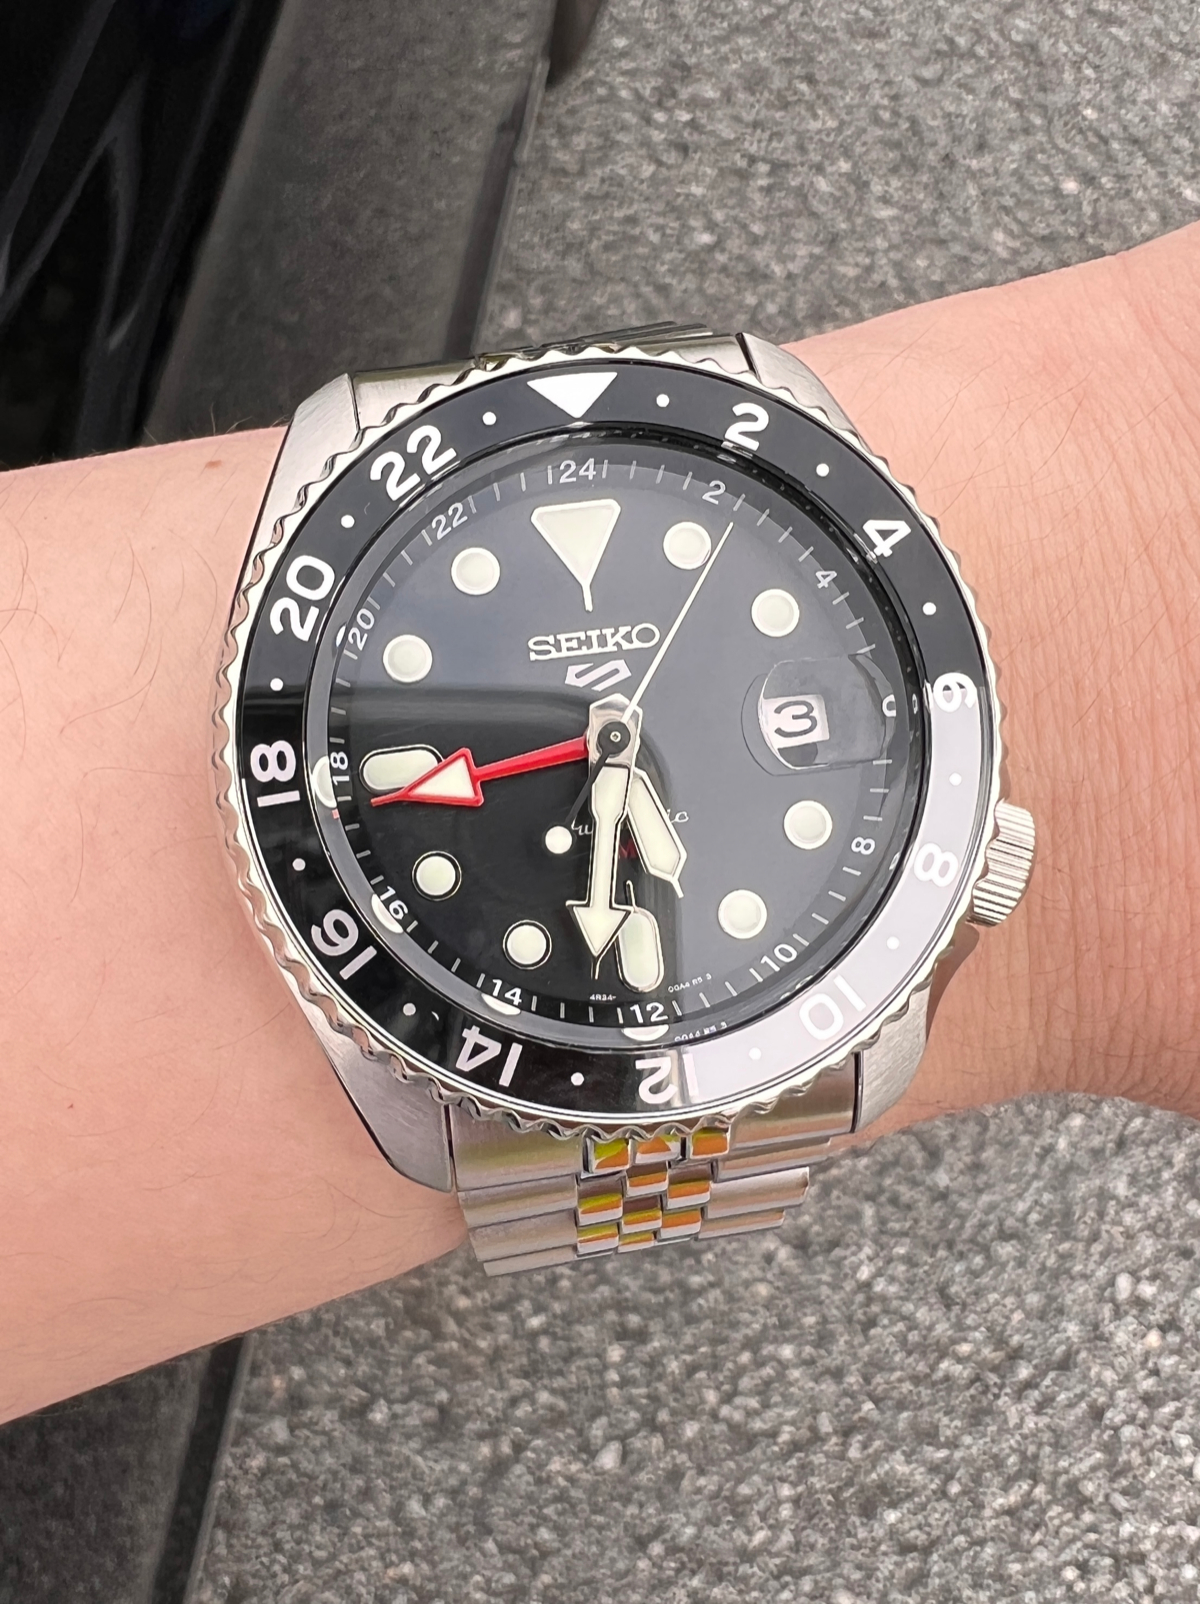 Owner review: Seiko 5 GMT SSK001 FIFTH WRIST